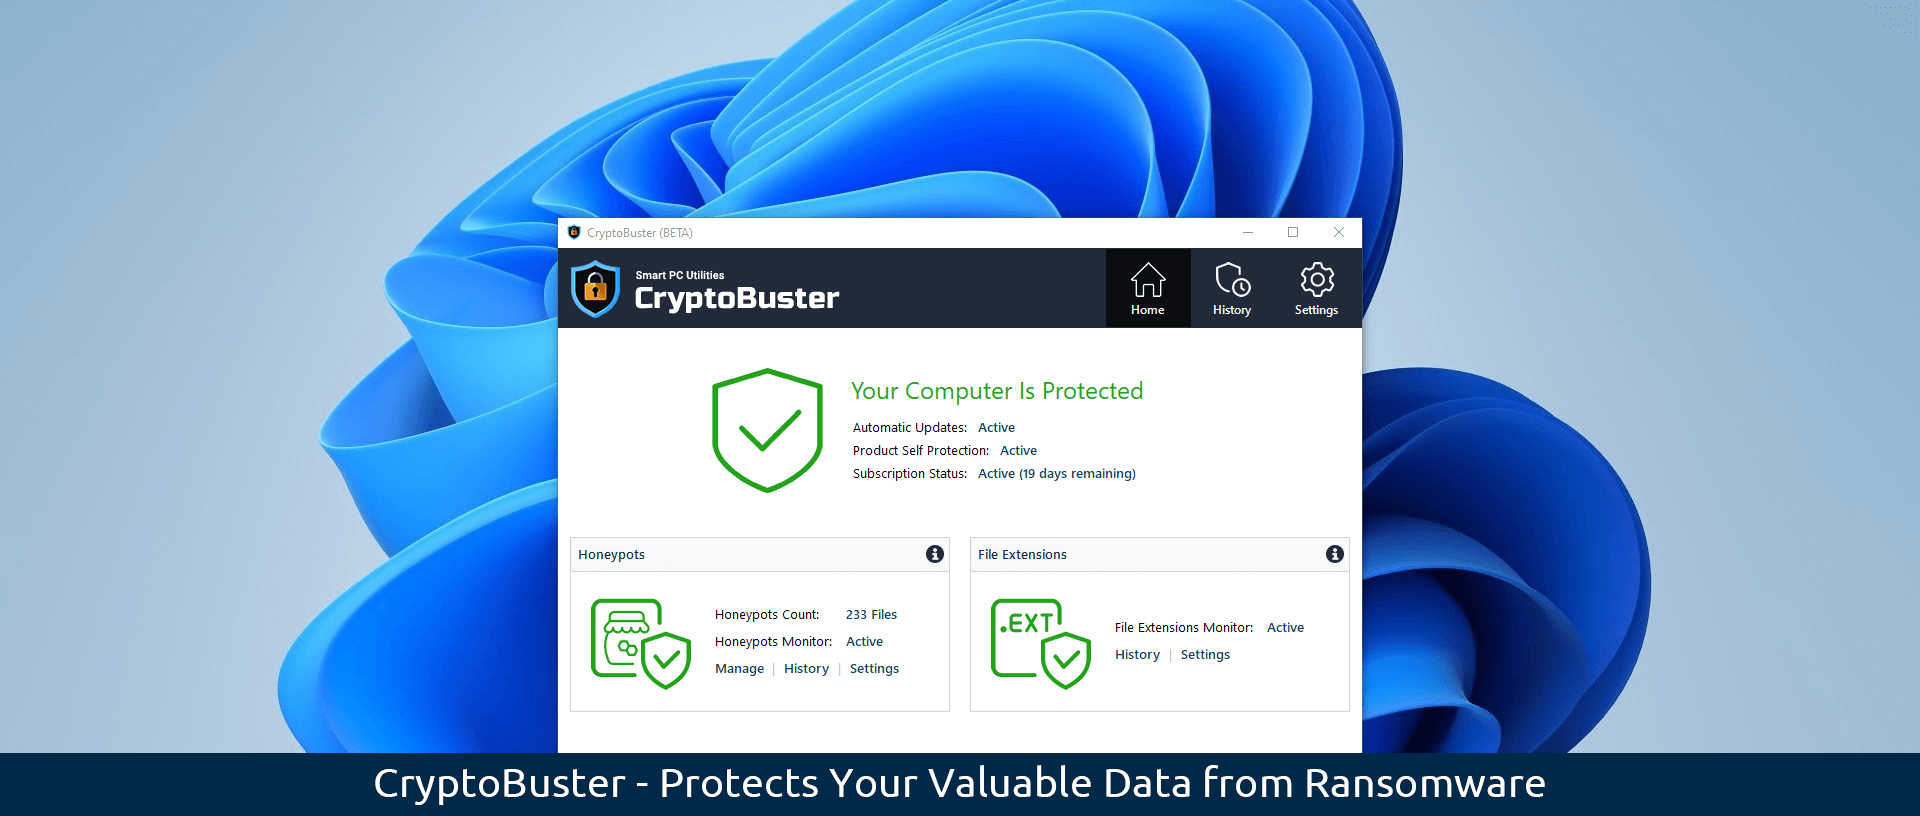 CryptoBuster - Protects Your Valuable Data from Ransomware